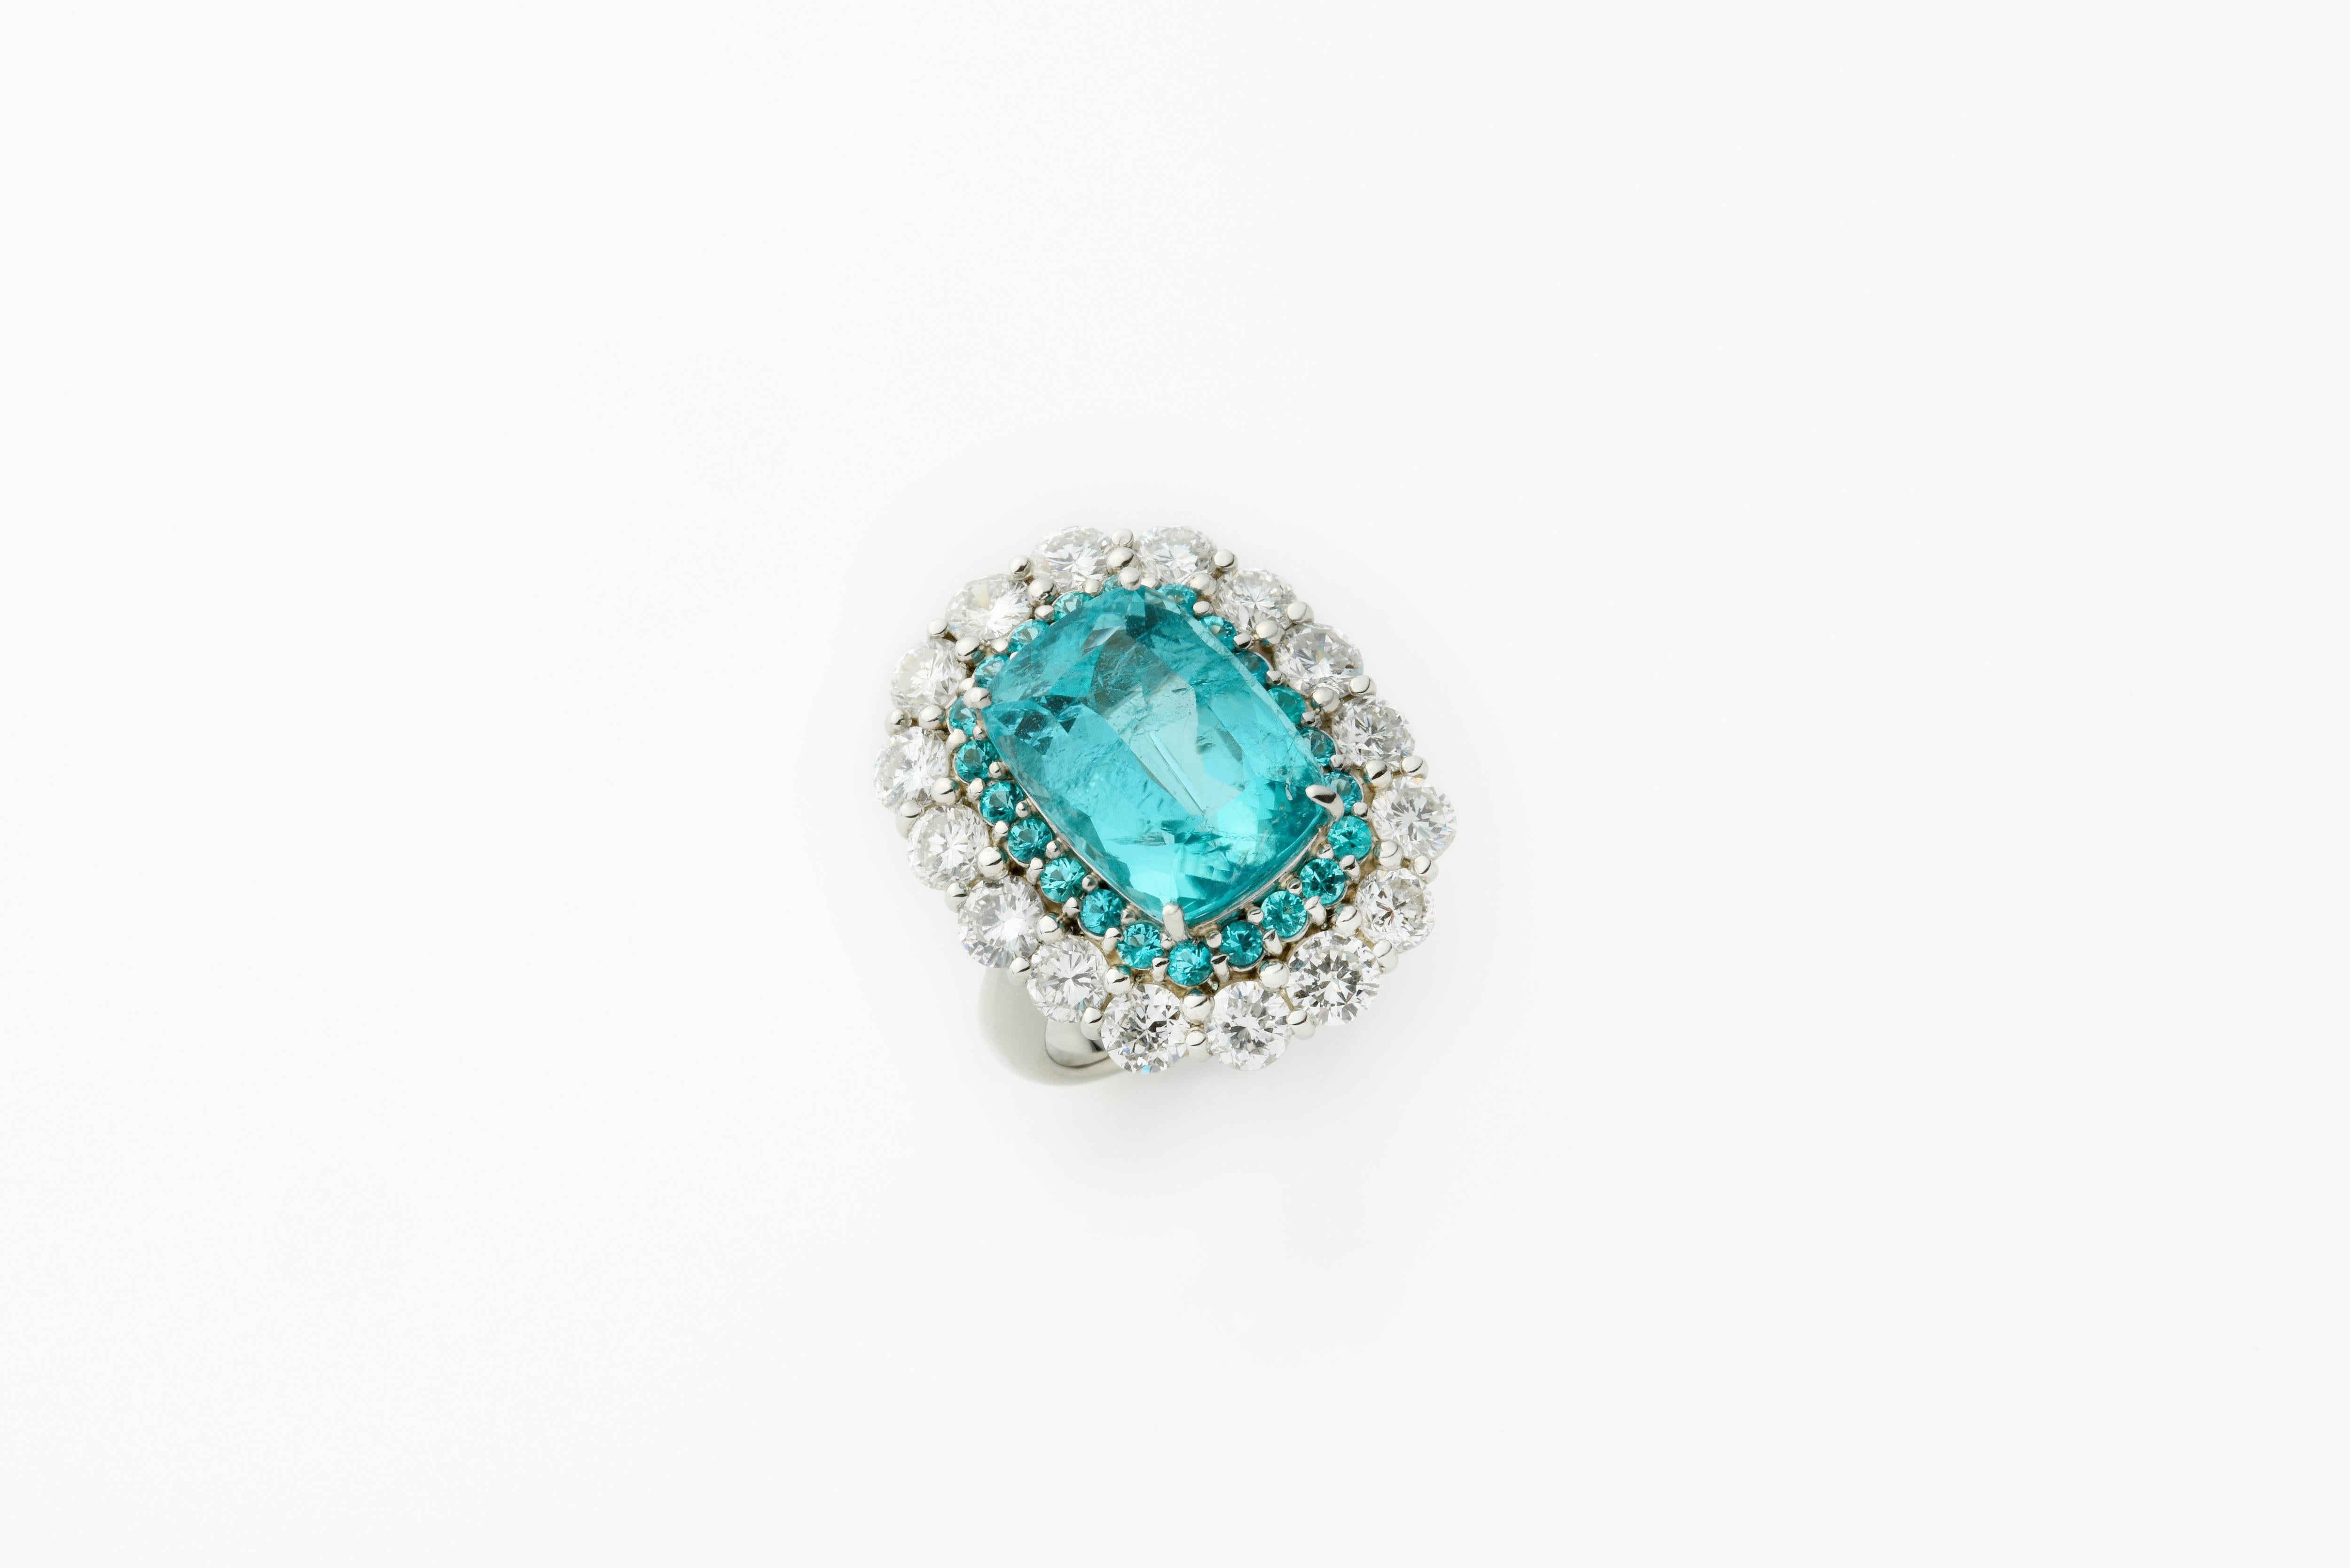 The sensational color, 8.99 carat Brazilian Paraiba tourmaline in the cocktail-style platinum ring. Both GIA & GRS Certified, This elegant, cushion-cut Paraiba is surrounded by two layers of stones: Brazilian Tourmaline stones and diamonds.  
This